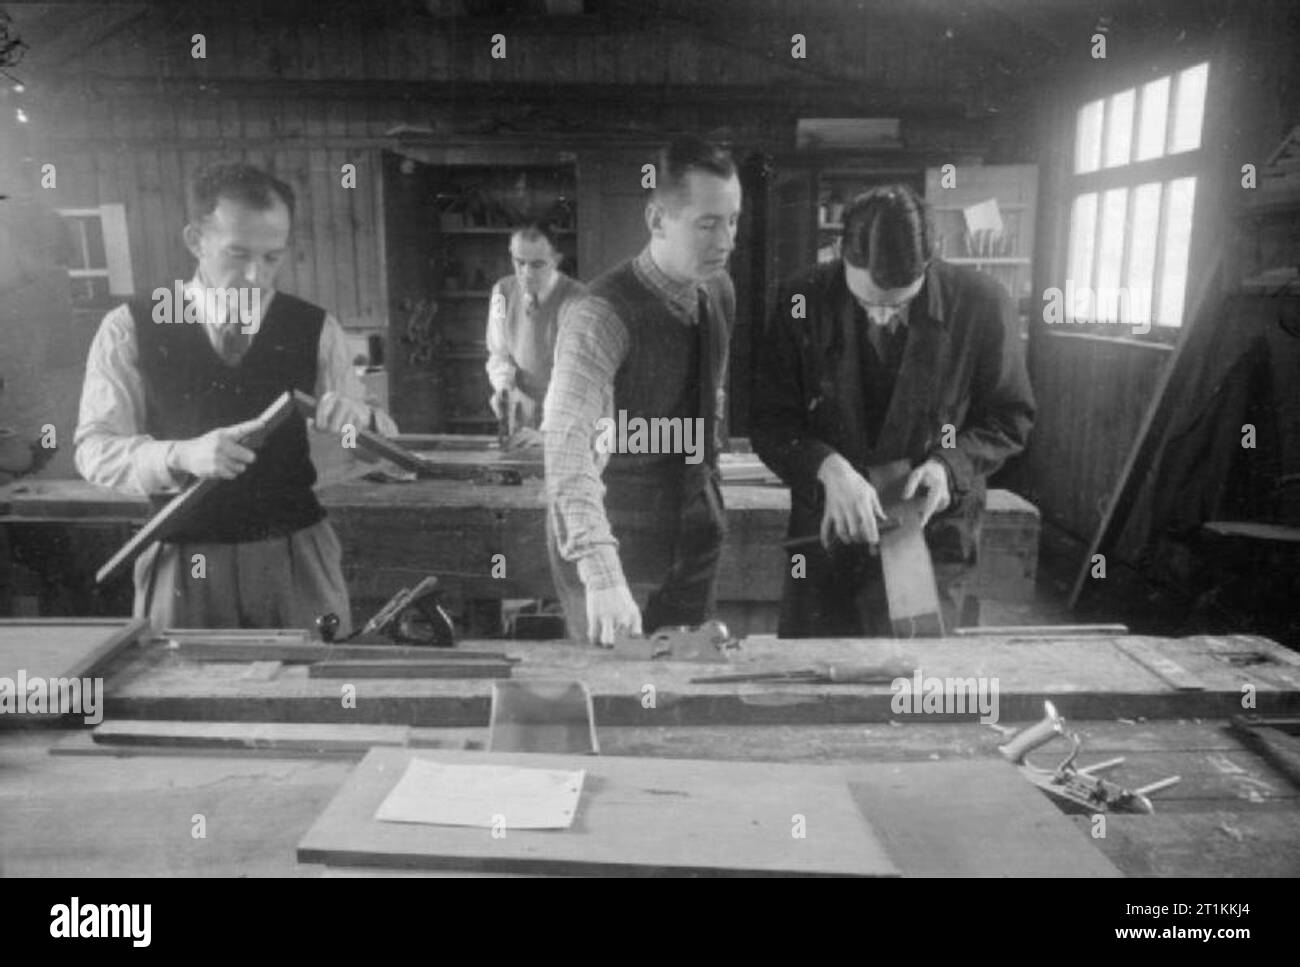 From the Services To Schoolmastering- Re-training at Goldsmith's College, London University, Nottingham, England, 1944 Ex-servicemen who are training to be handicraft teachers at Goldsmiths College (based at Nottingham University since the outbreak of war) take part in a lesson on woodwork and bookbinding. Stock Photo